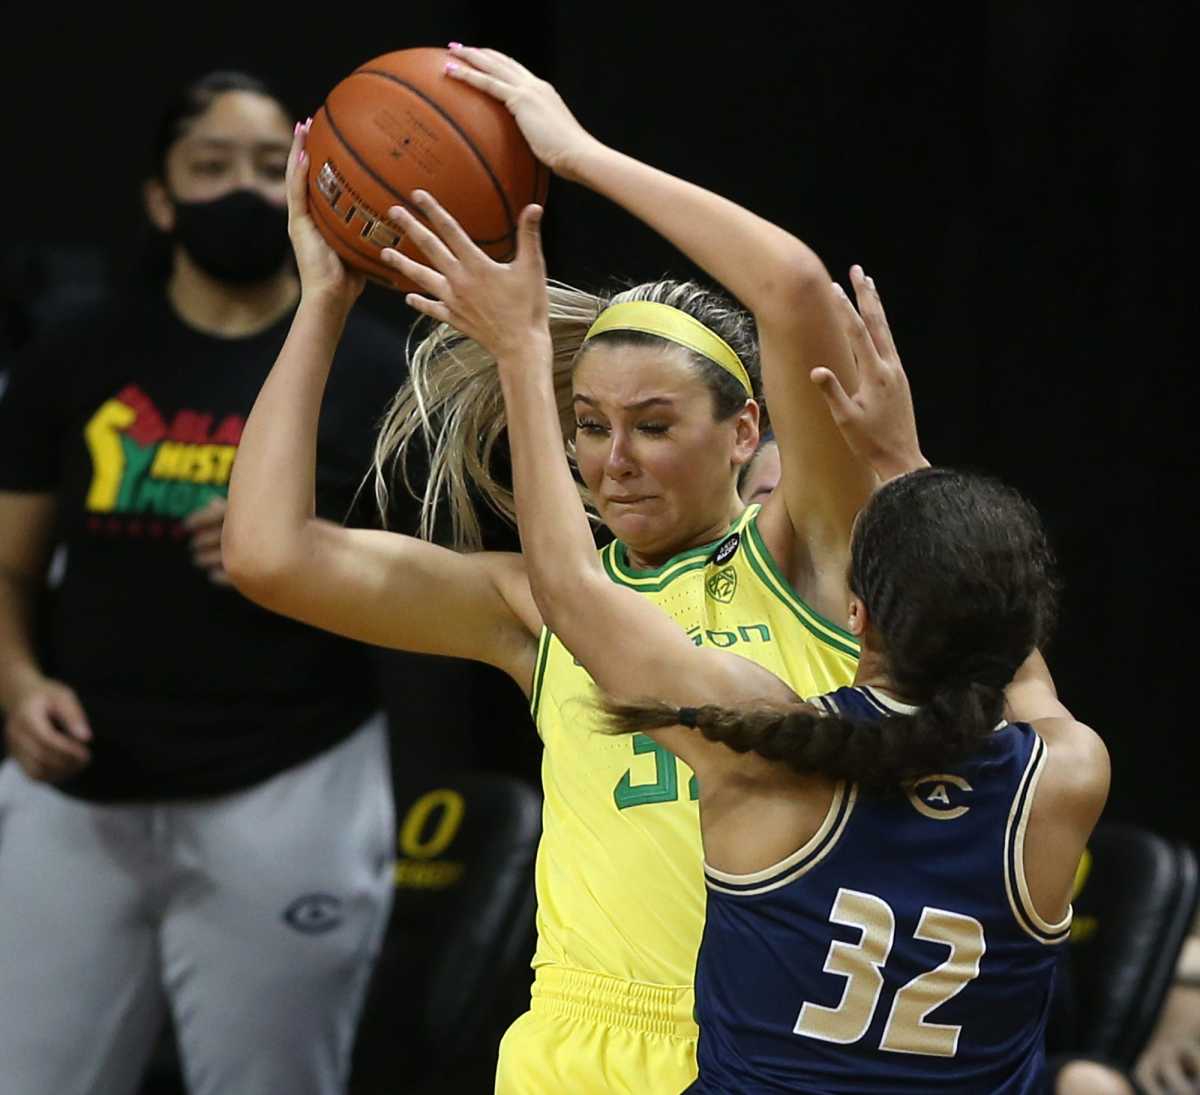 Sydney Parrish forces a turnover against UC Davis' Cierra Hall in the closing moments of the game in Feb. 6, 2021.